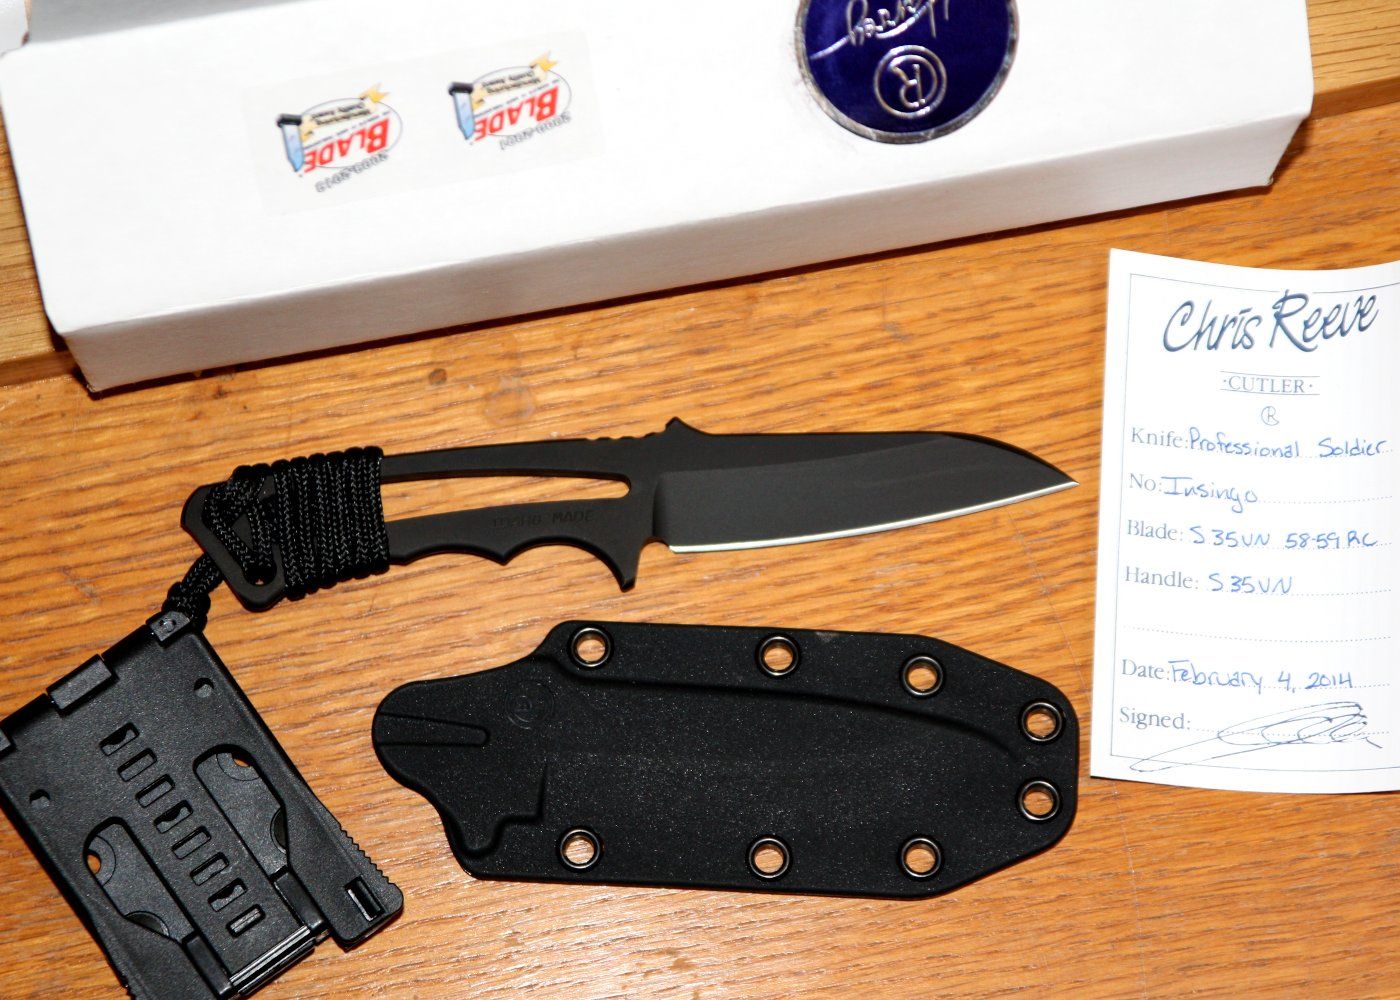 Chris Reeve Knives - Professional Soldier - Review